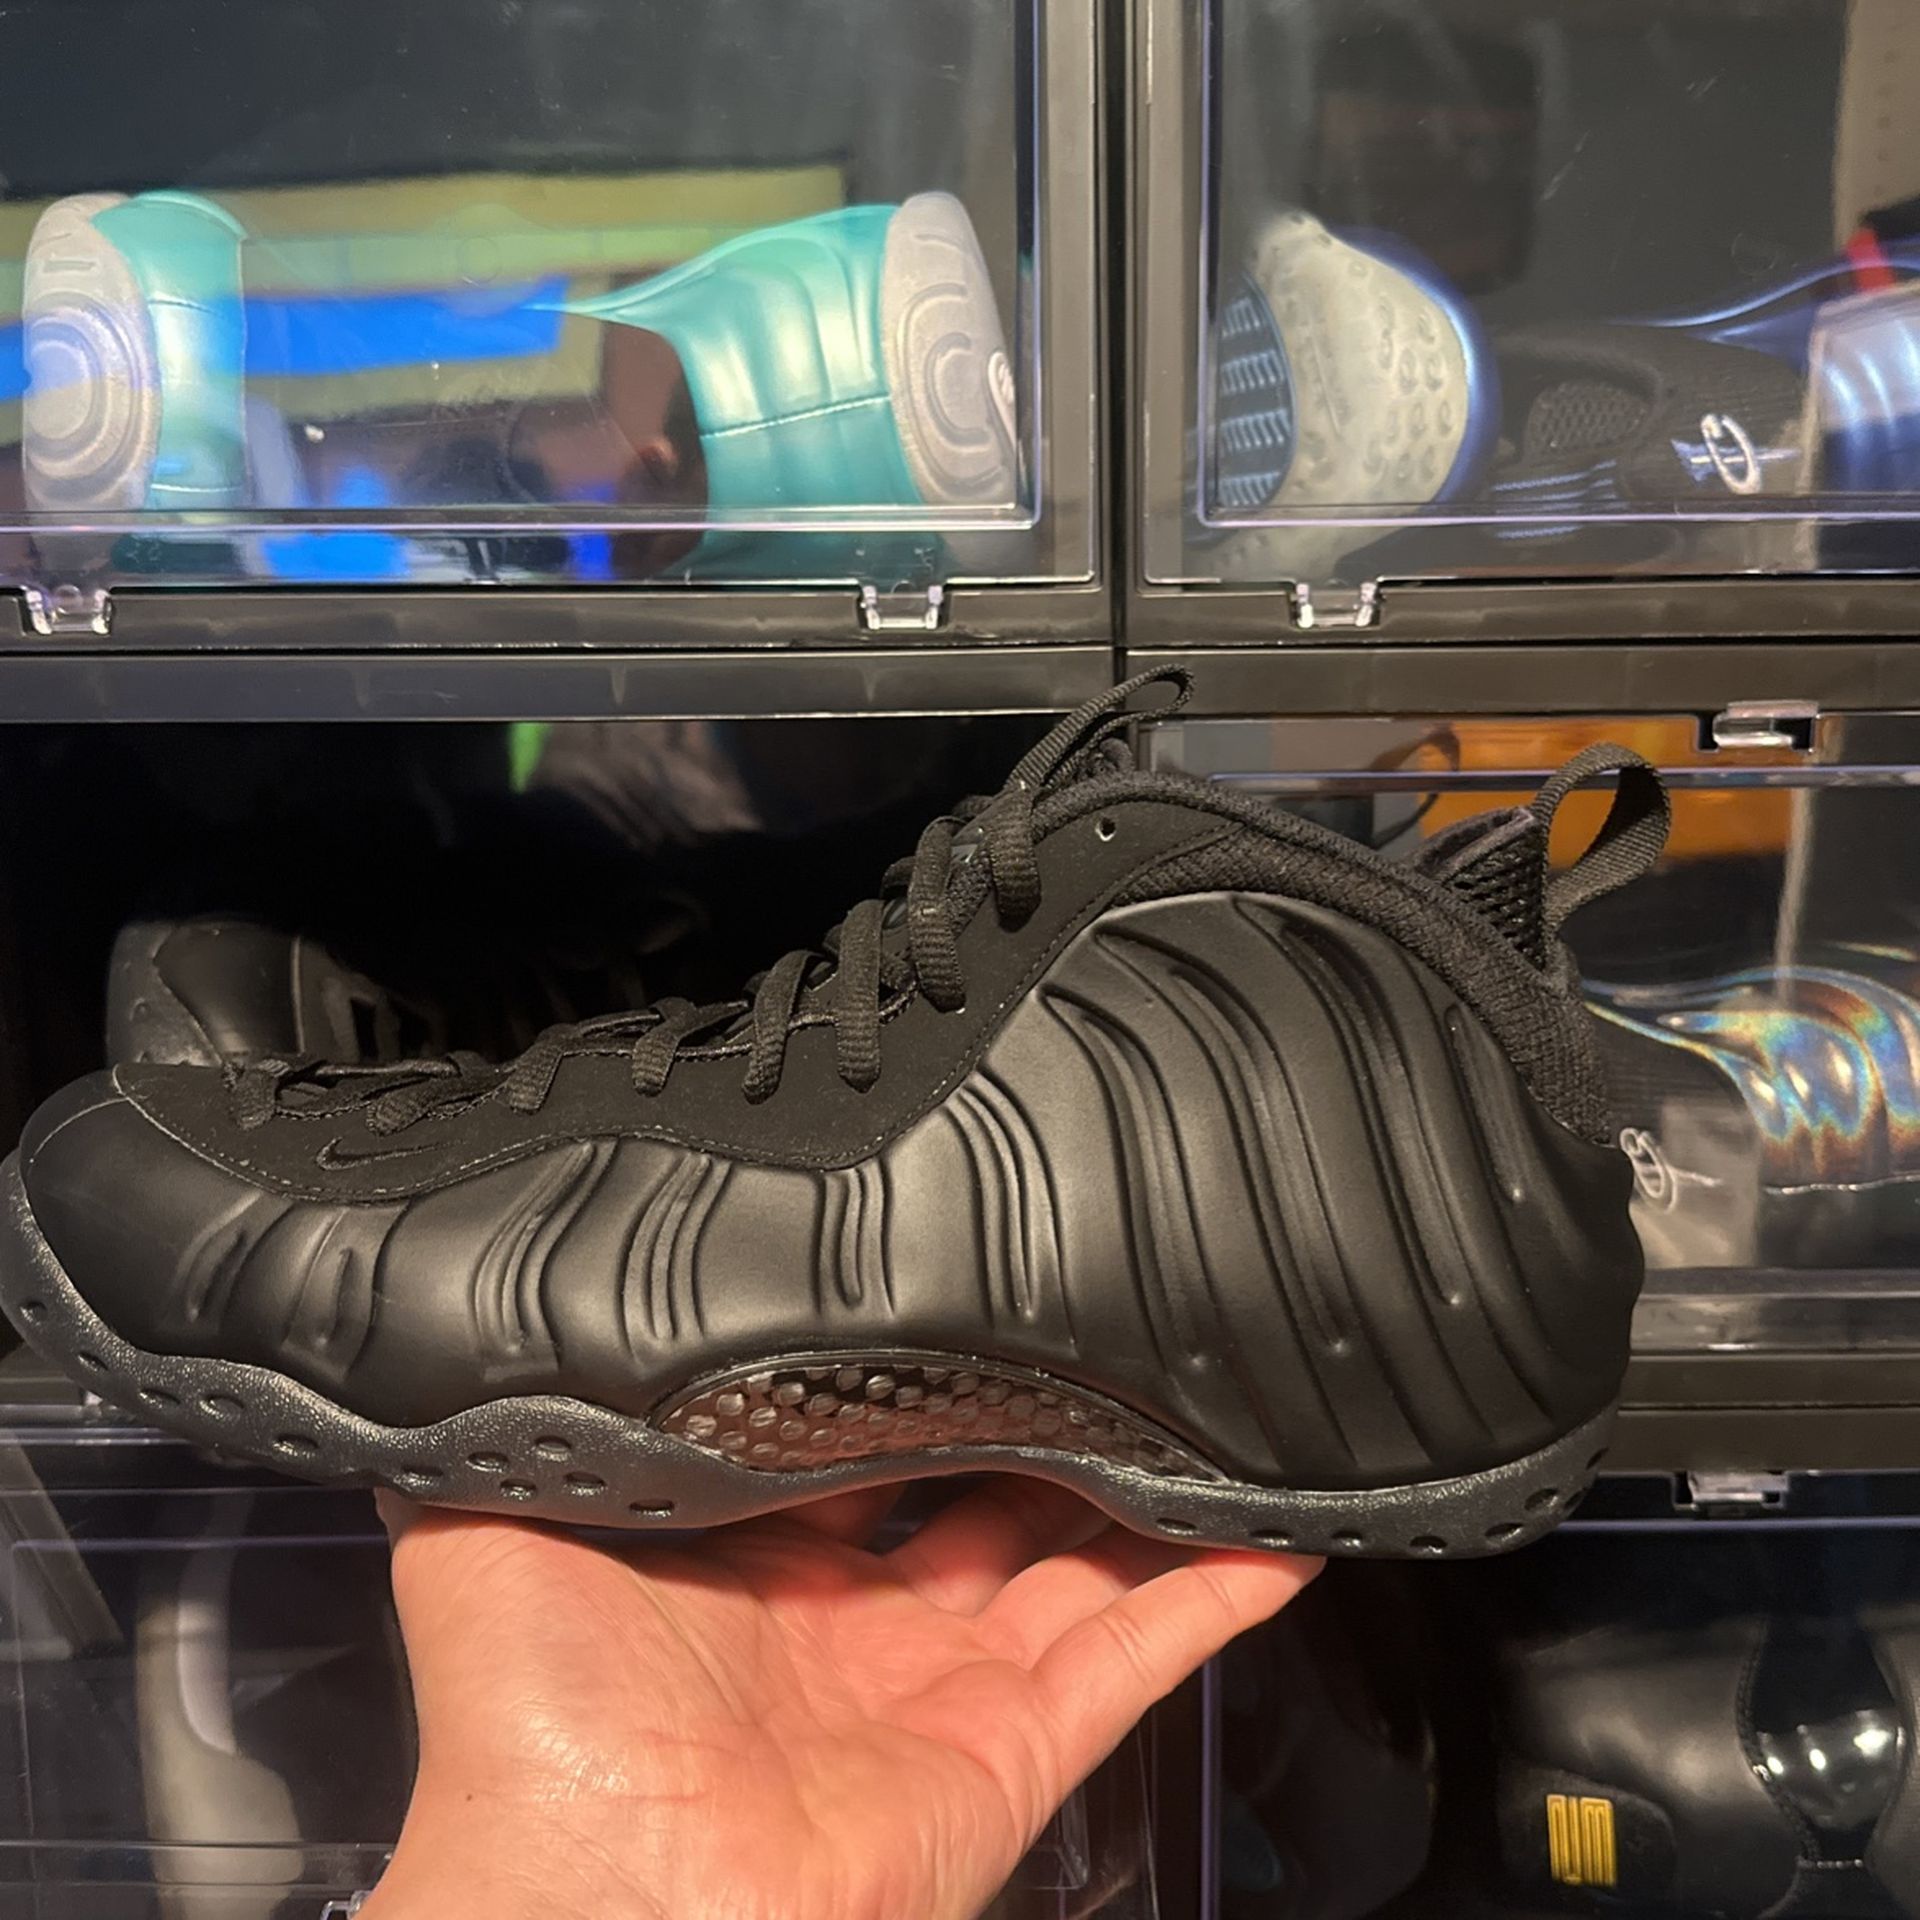 Nike Air Foamposite “Anthracite” (NEW) 2020 Sz 10.5